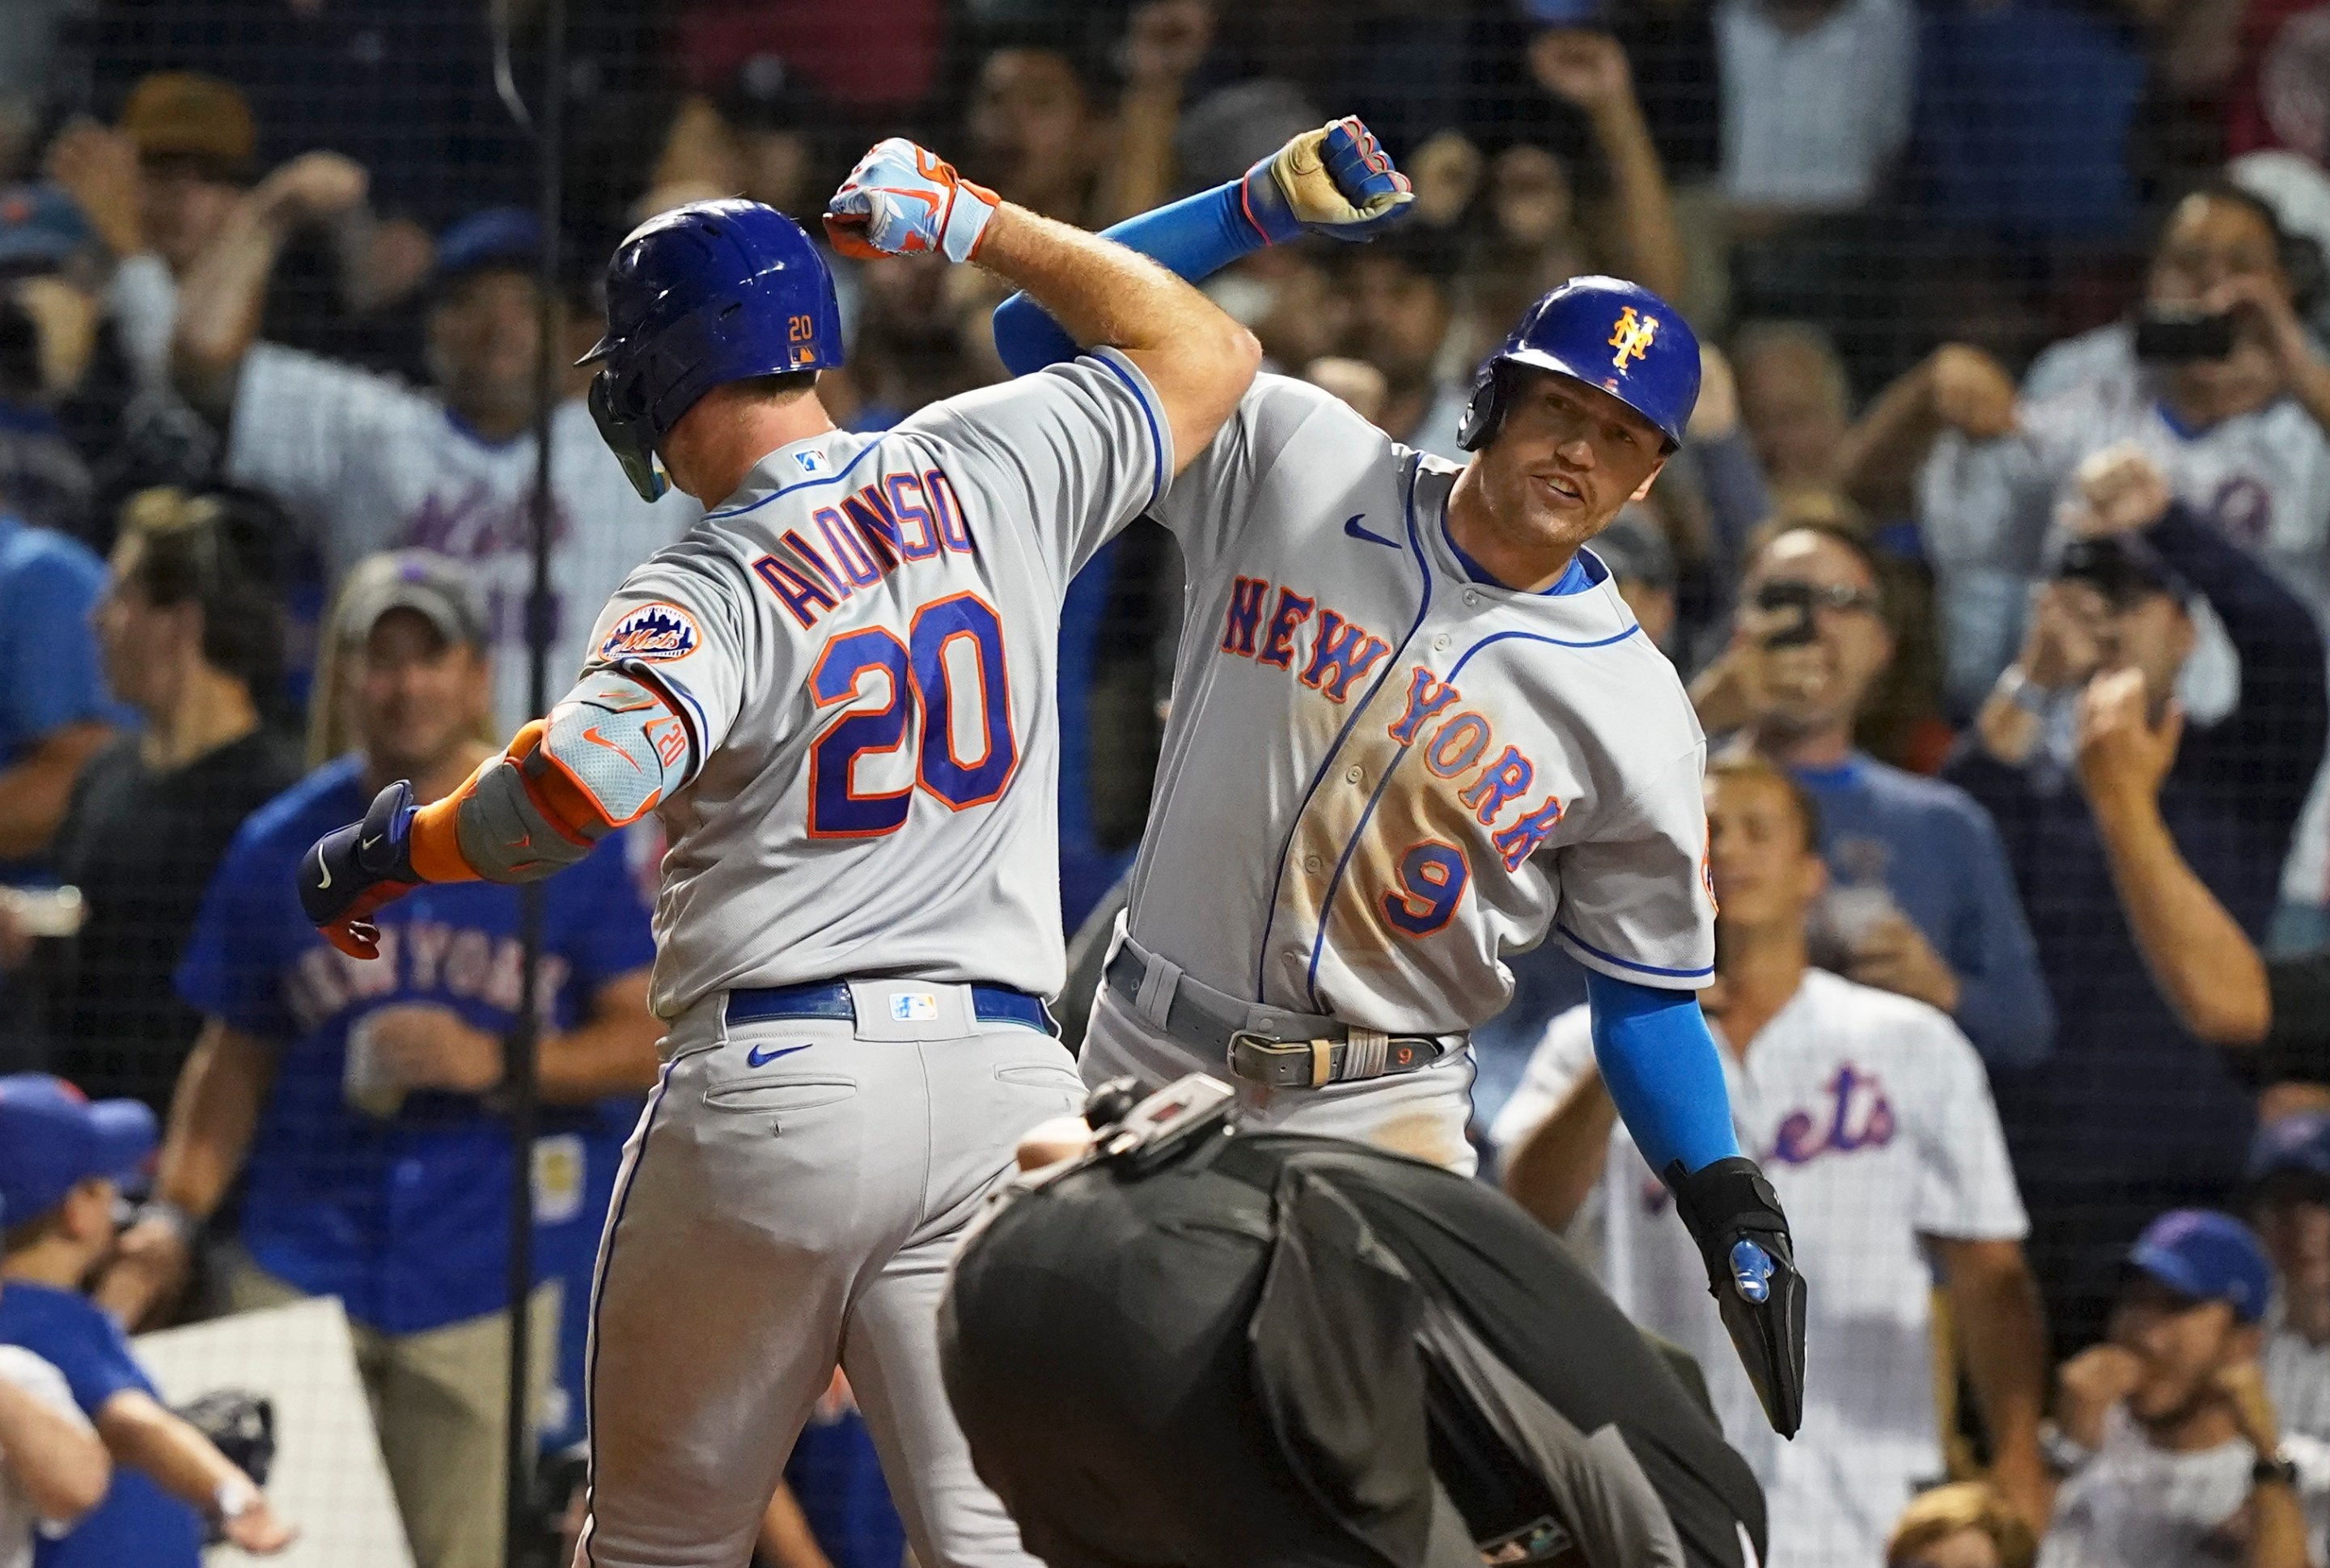 Pete Alonso and Brandon Nimmo do the Bash Brothers forearm thing during a July Mets win against the Cubs.